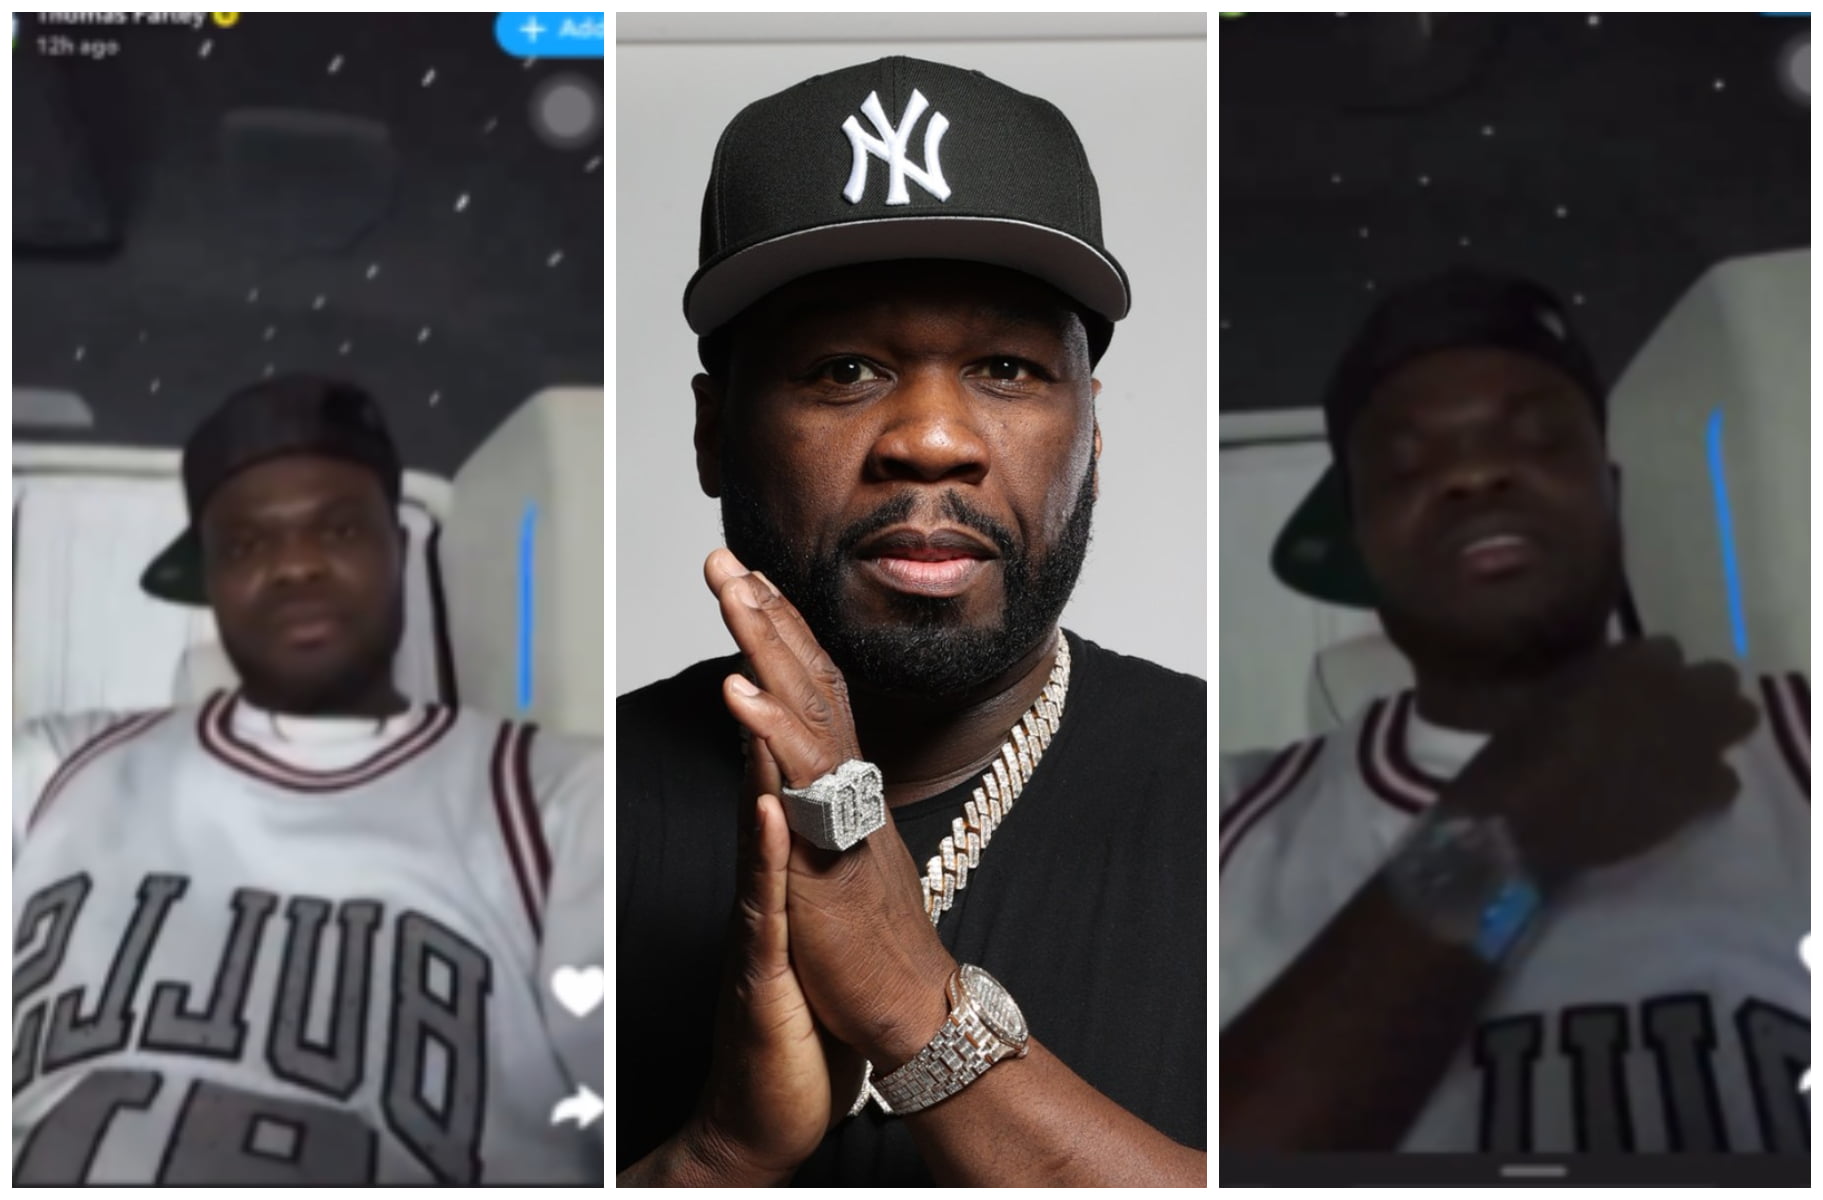 Thomas Partey calls himself 50 cedis as he dresses like 50 cent in a viral video